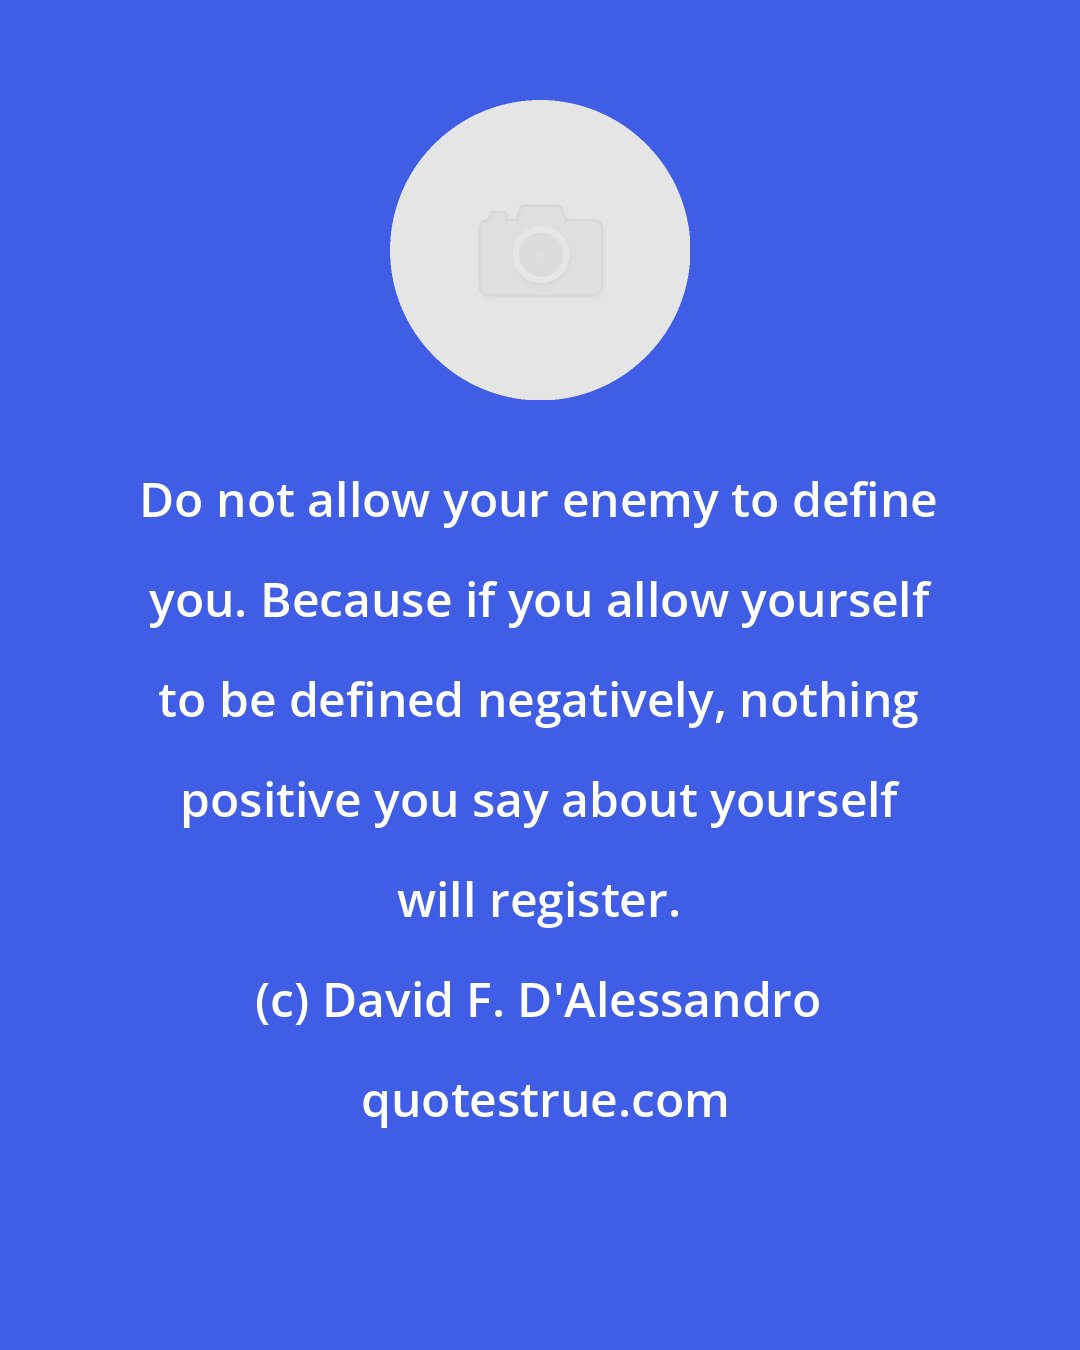 David F. D'Alessandro: Do not allow your enemy to define you. Because if you allow yourself to be defined negatively, nothing positive you say about yourself will register.